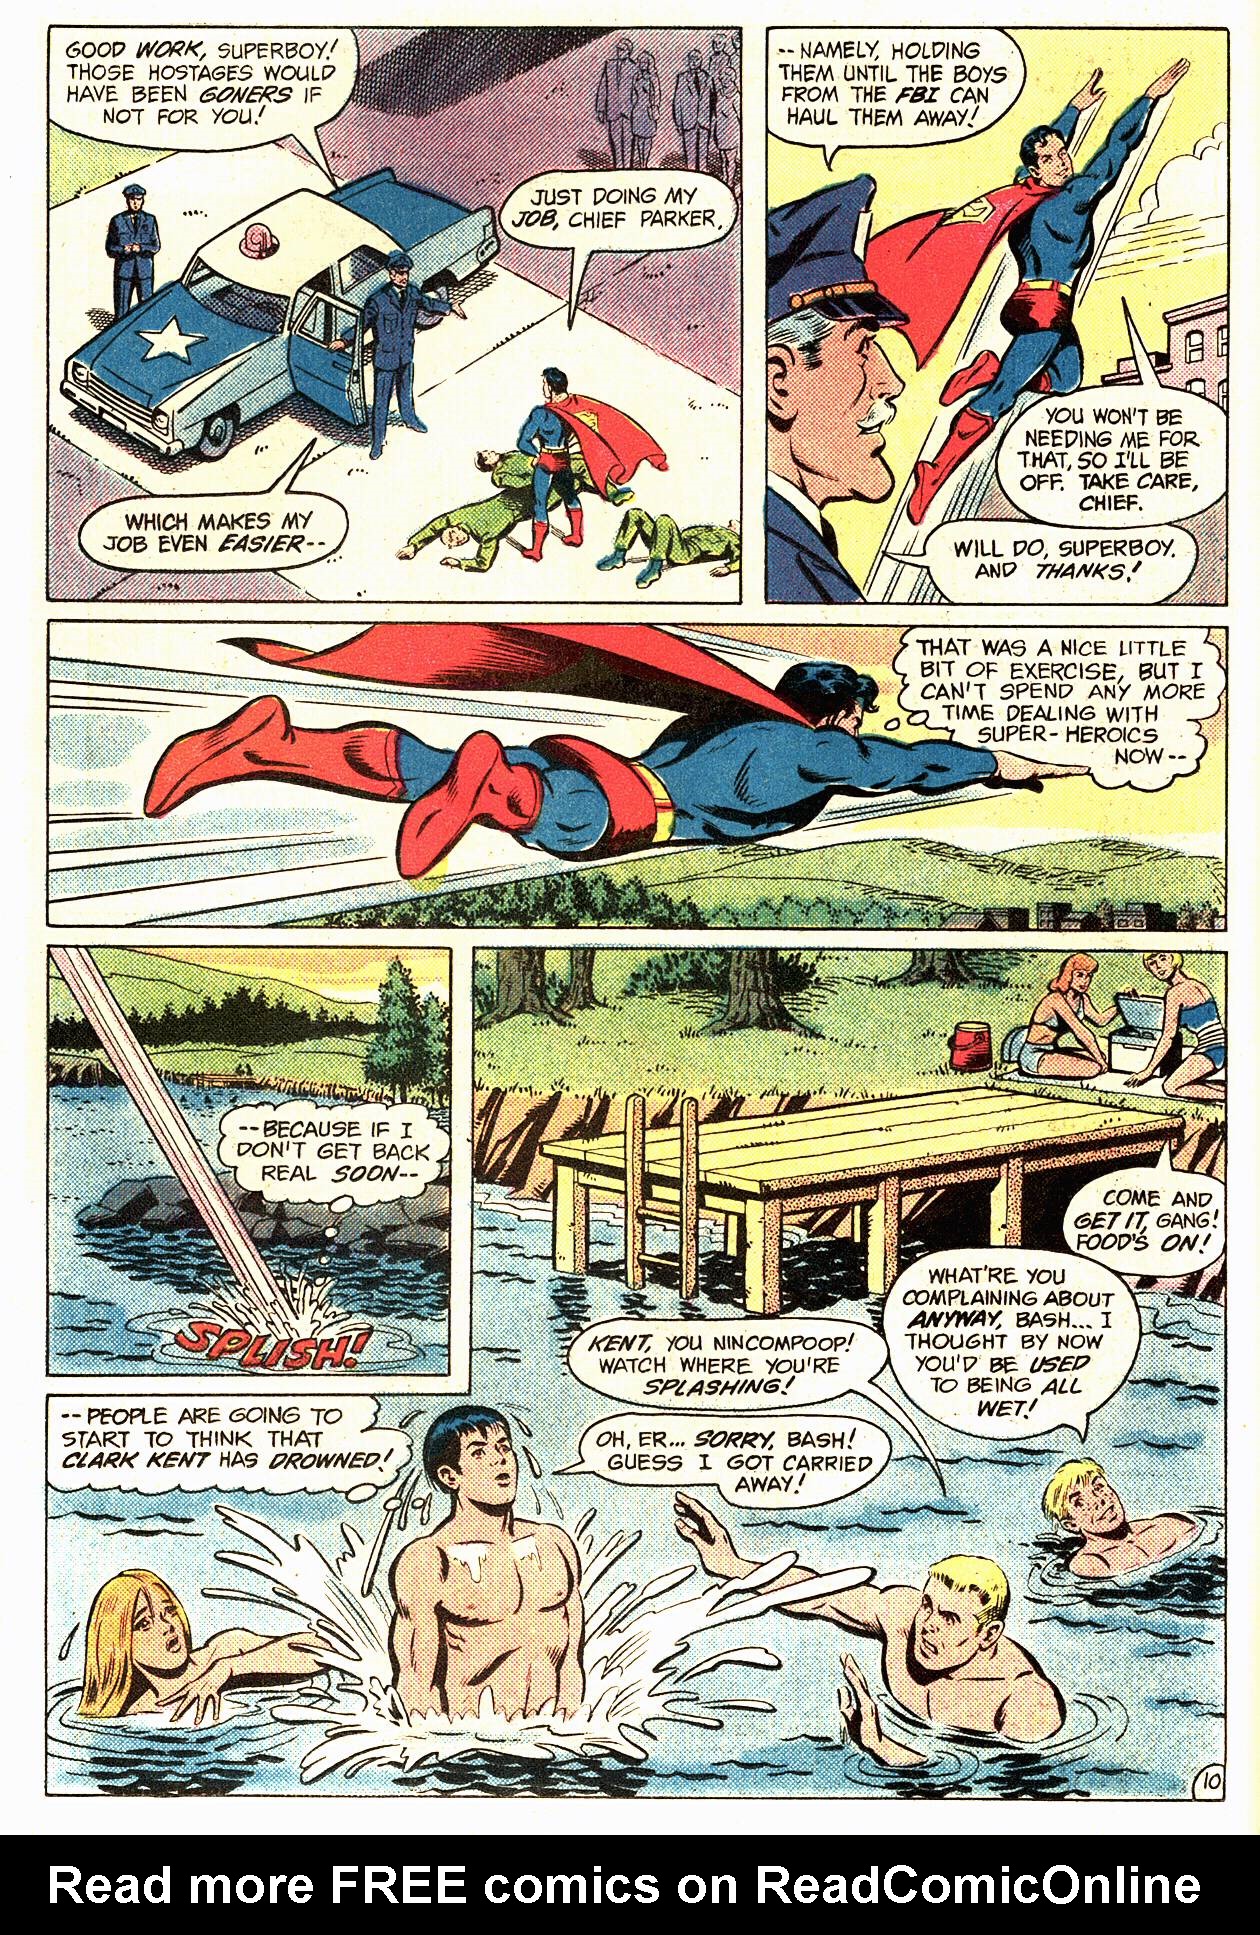 The New Adventures of Superboy 50 Page 10